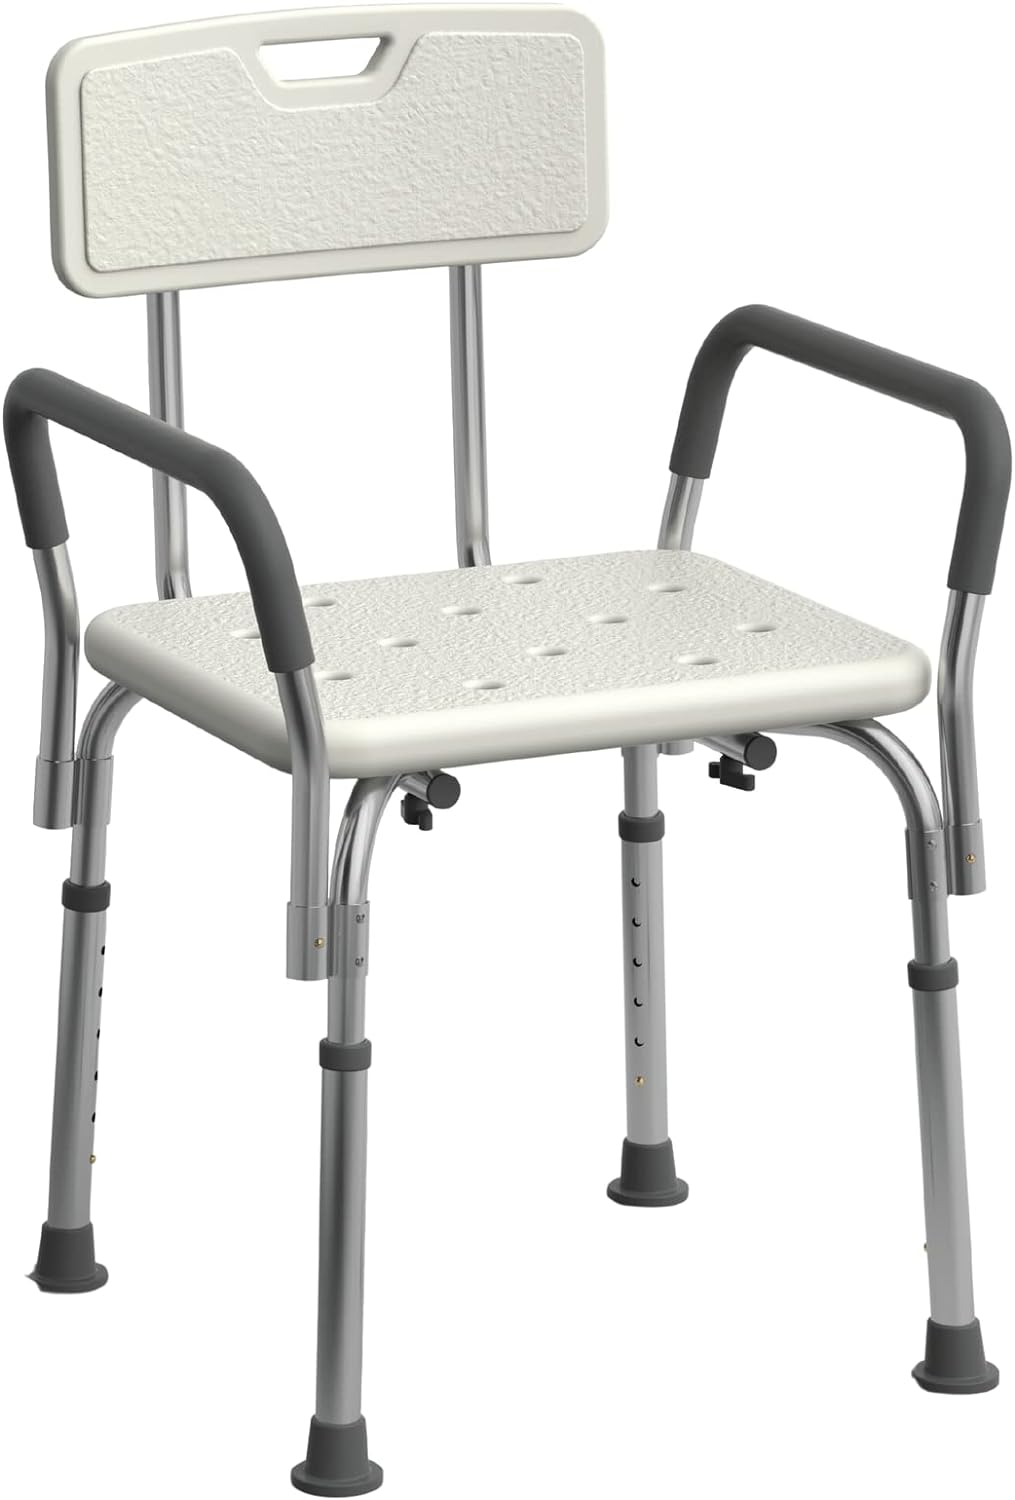 Medline Shower Chair Seat with Padded Armrests and Back Heavy Duty Shower Chair for Bathtub Slip Resistant Shower Seat with Adjustable Height Shower Chair for Inside Shower with 350 lb Capacity Image